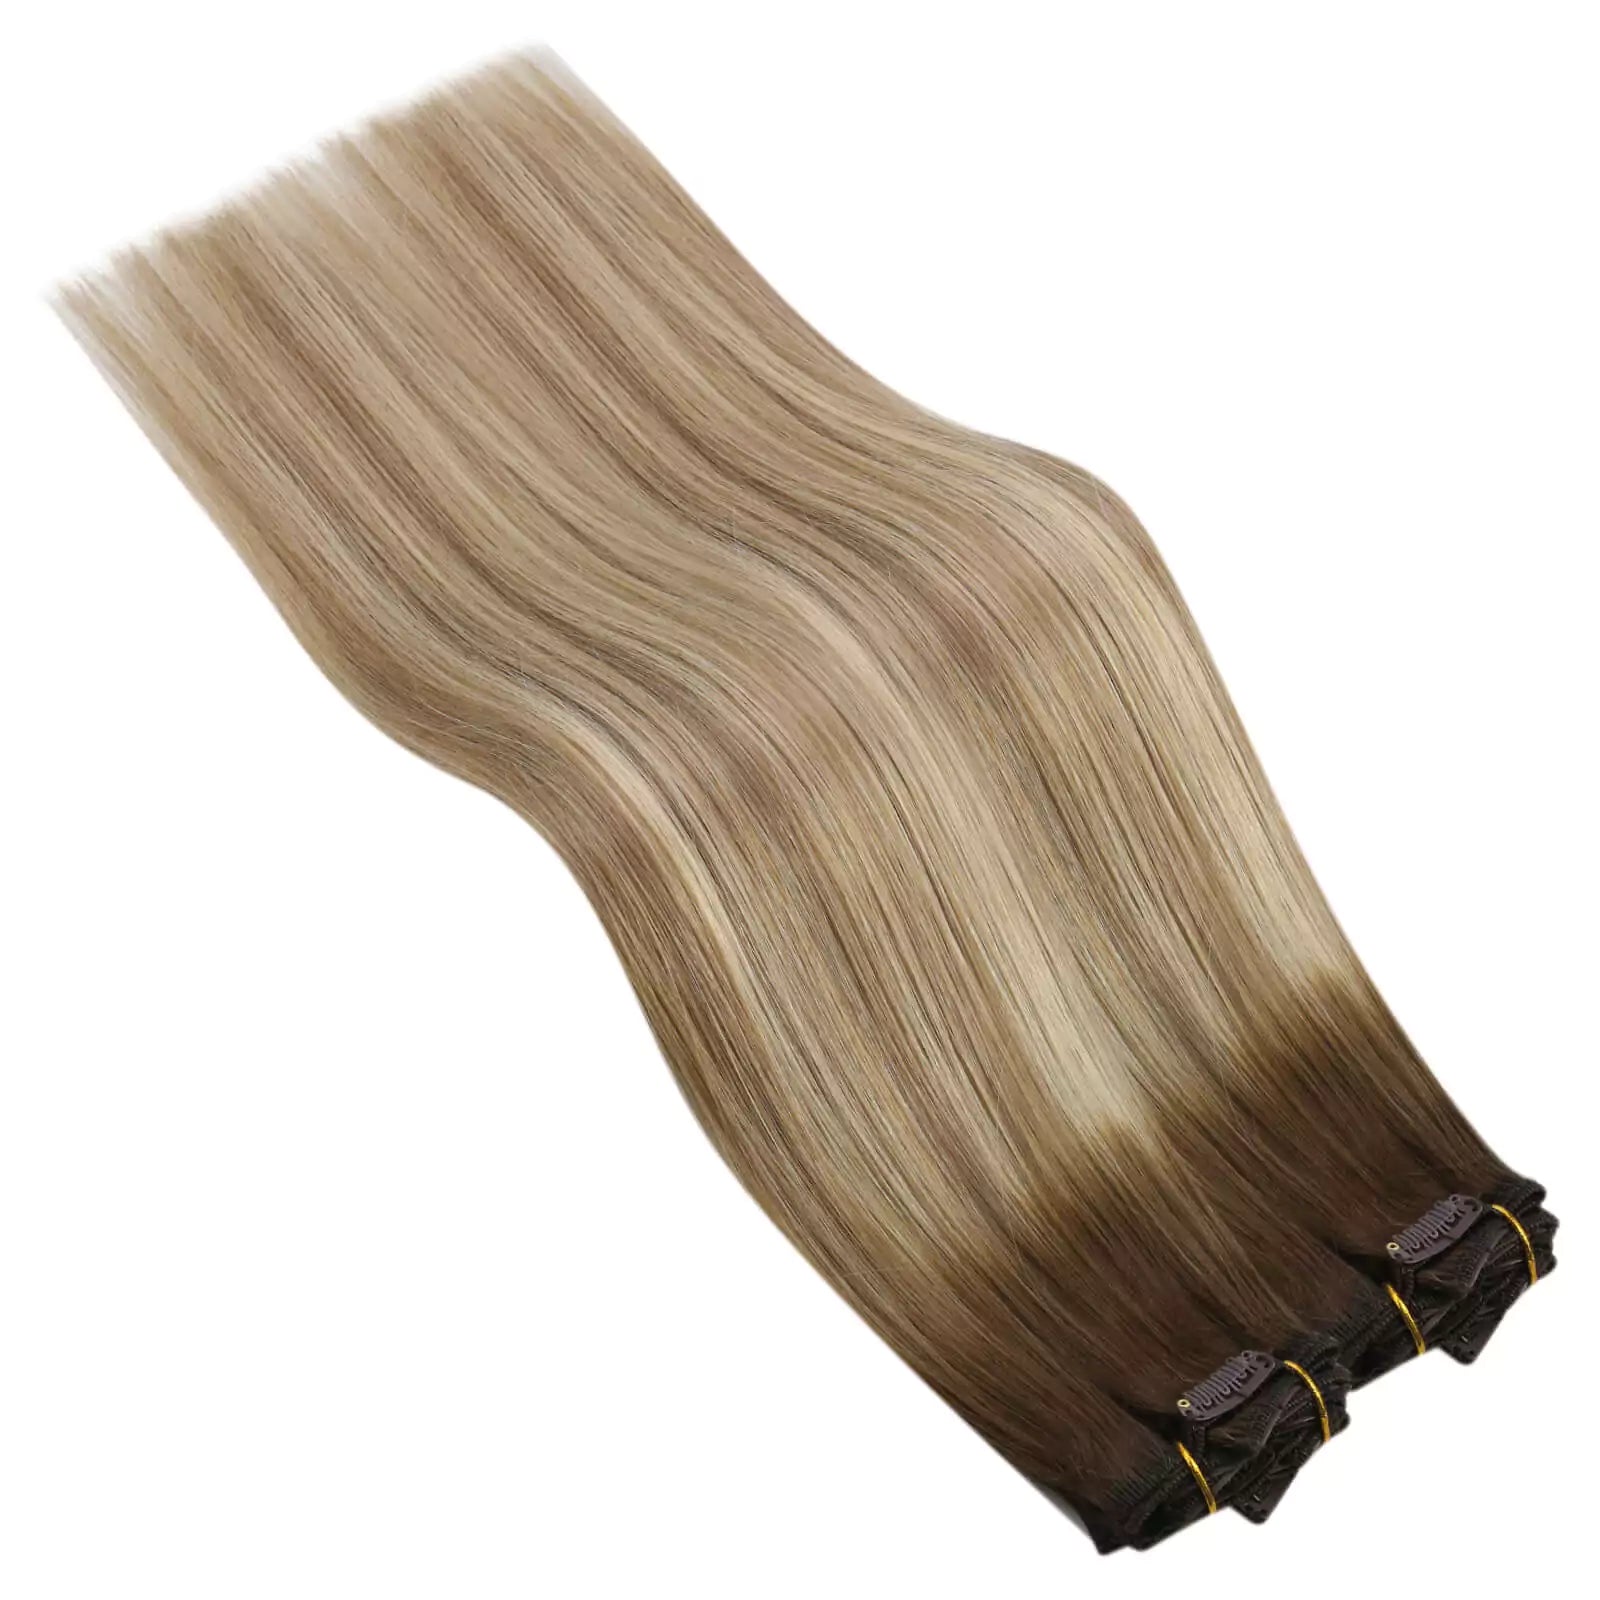 clip-in-human-hair-extensions-color-brown-to-blonde-7pcs-24-inch